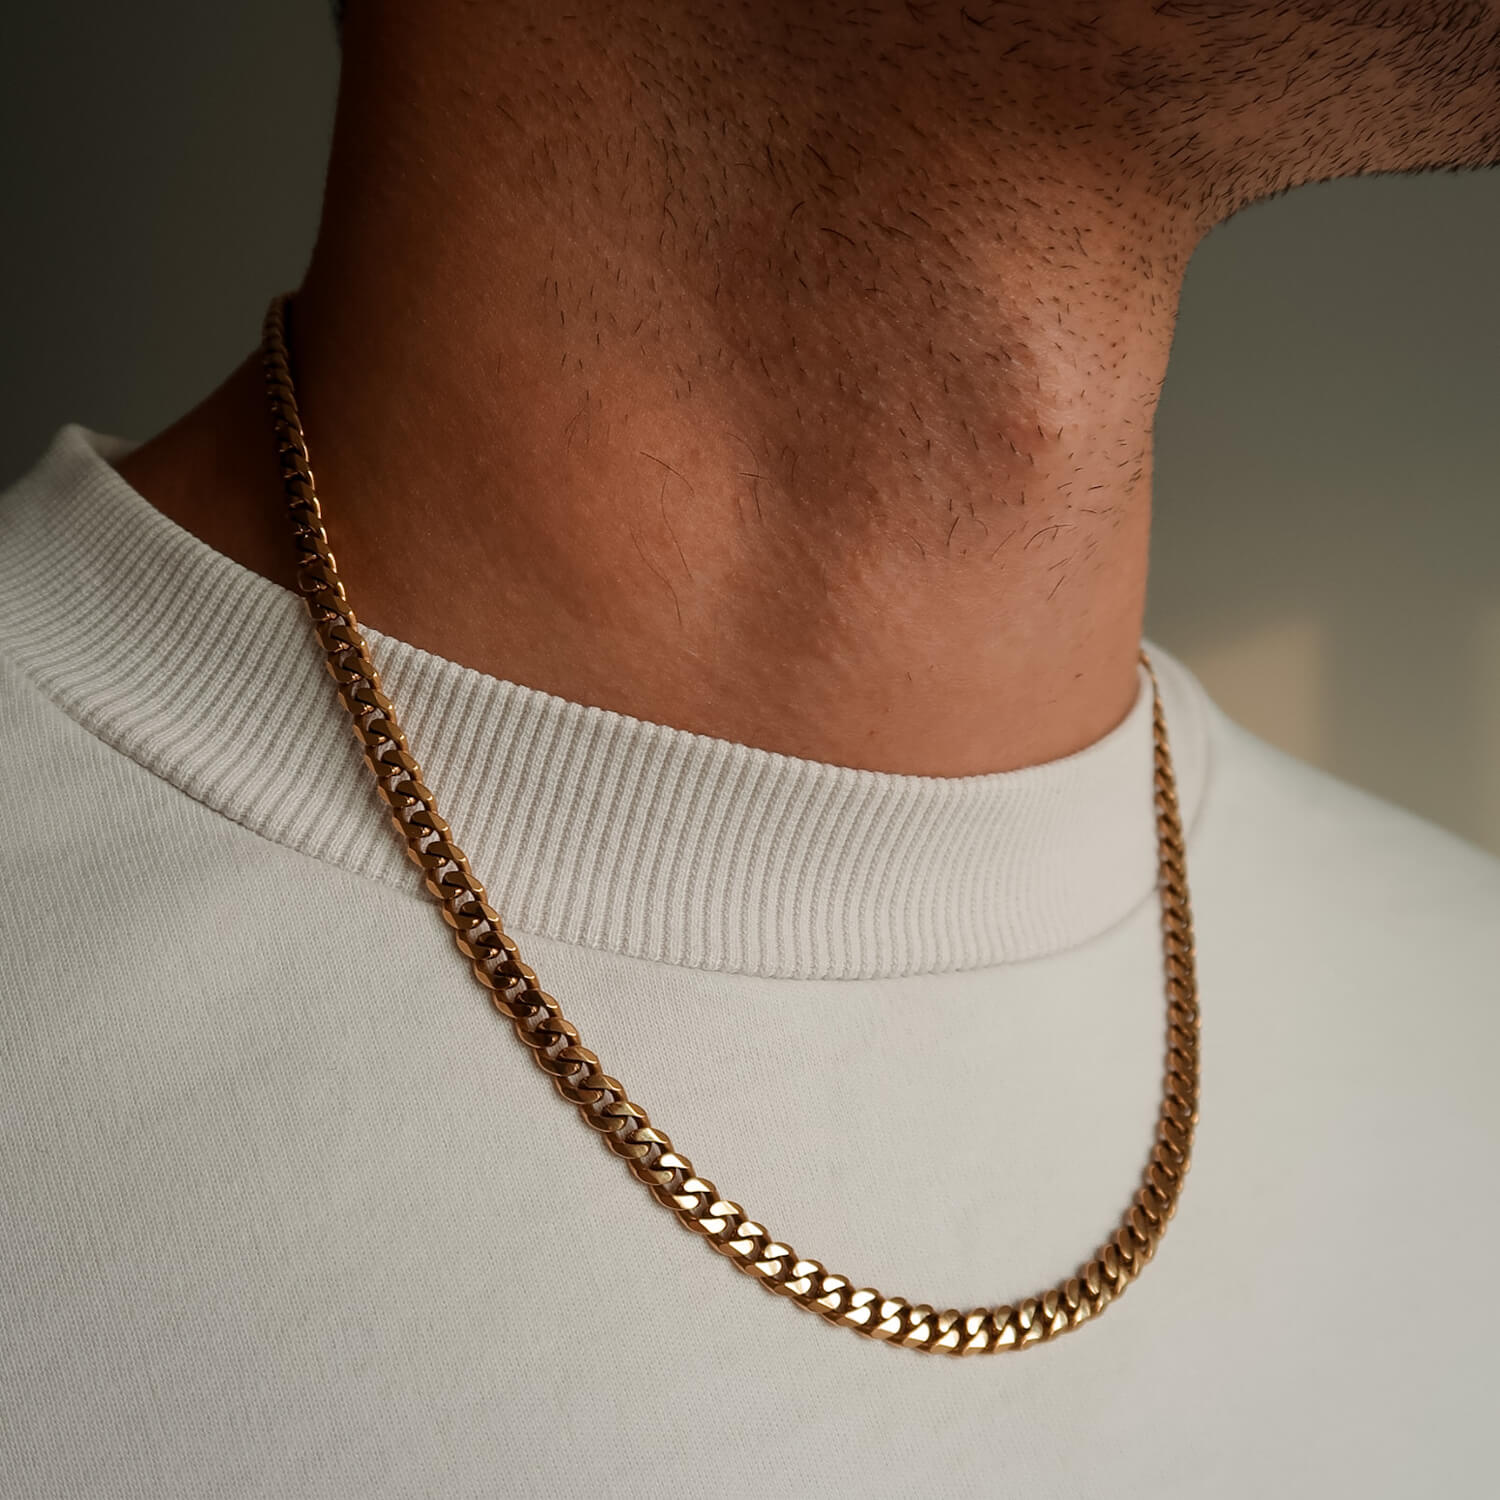 5mm gold cuban link chain on male neck